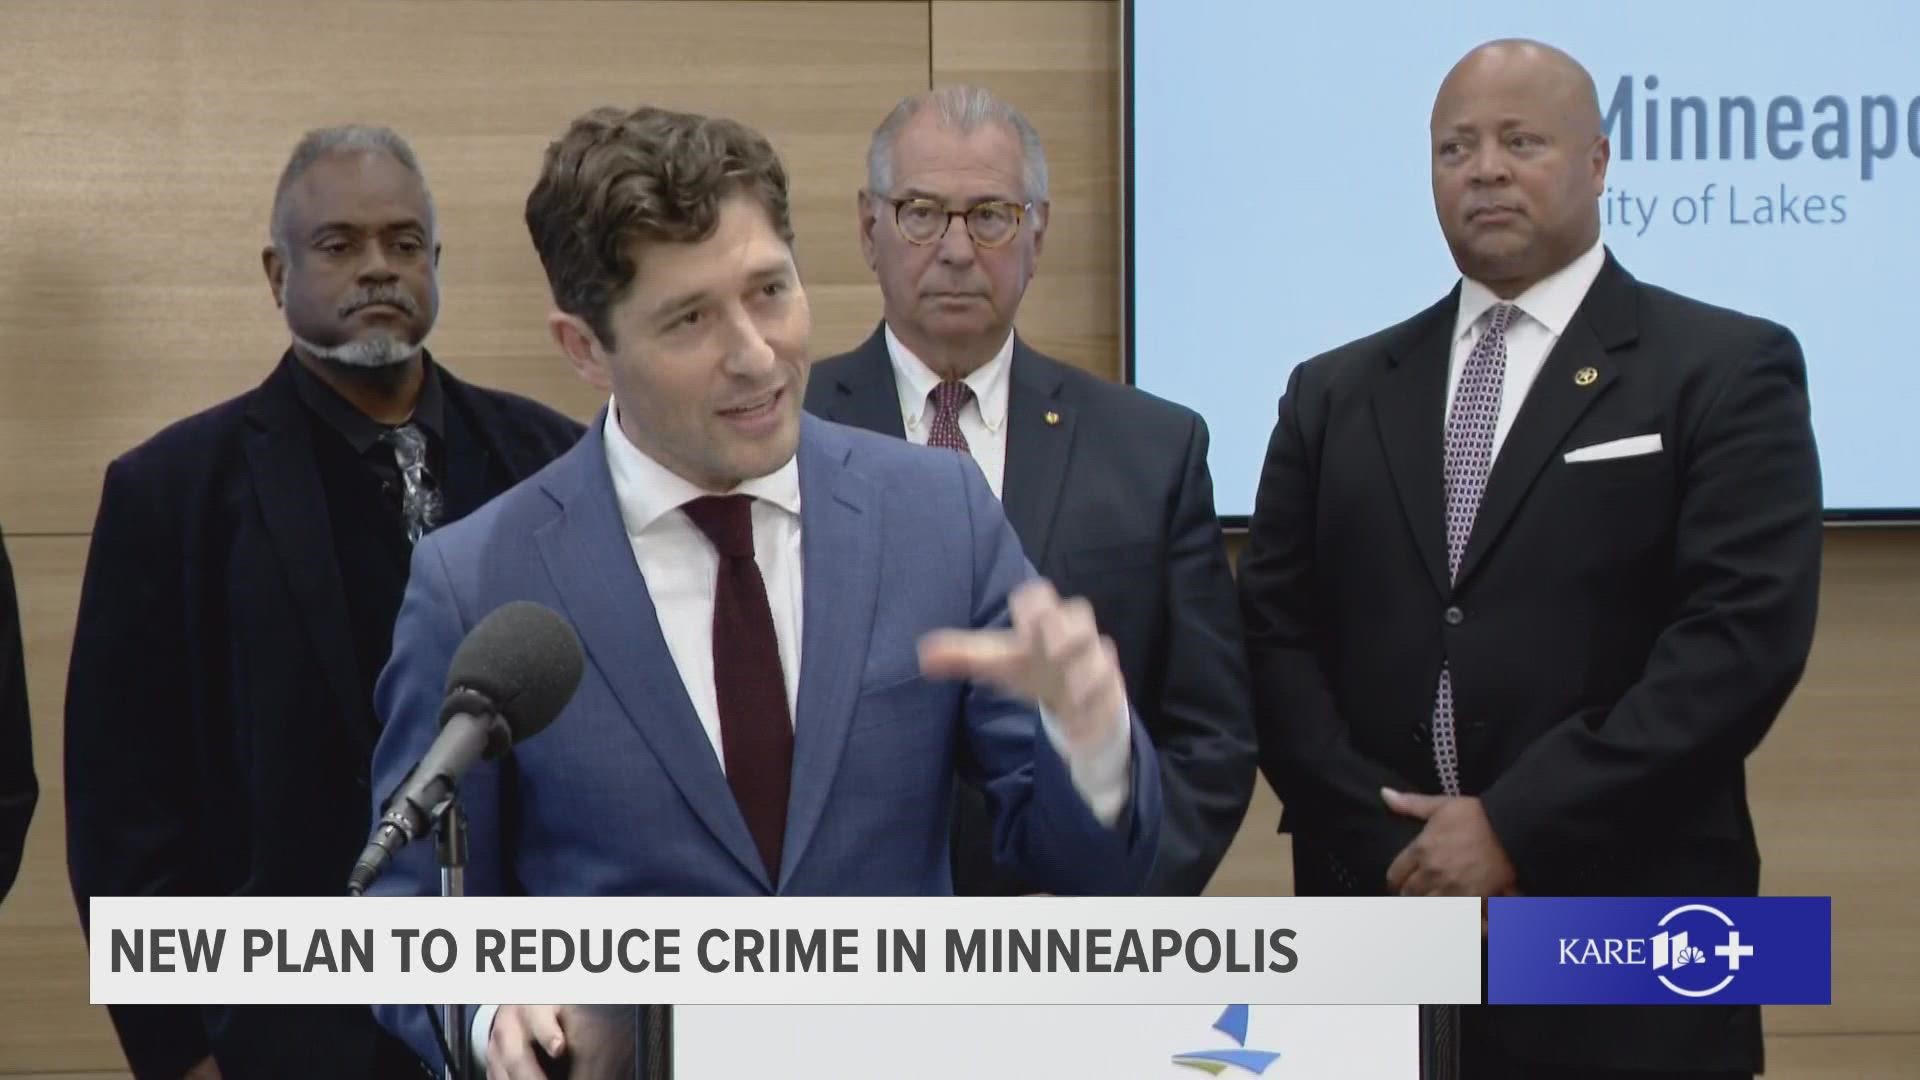 Minneapolis Mayor Jacob Frey and other city leaders announce a new plan to reduce crime in the city called "Operation Endeavour."